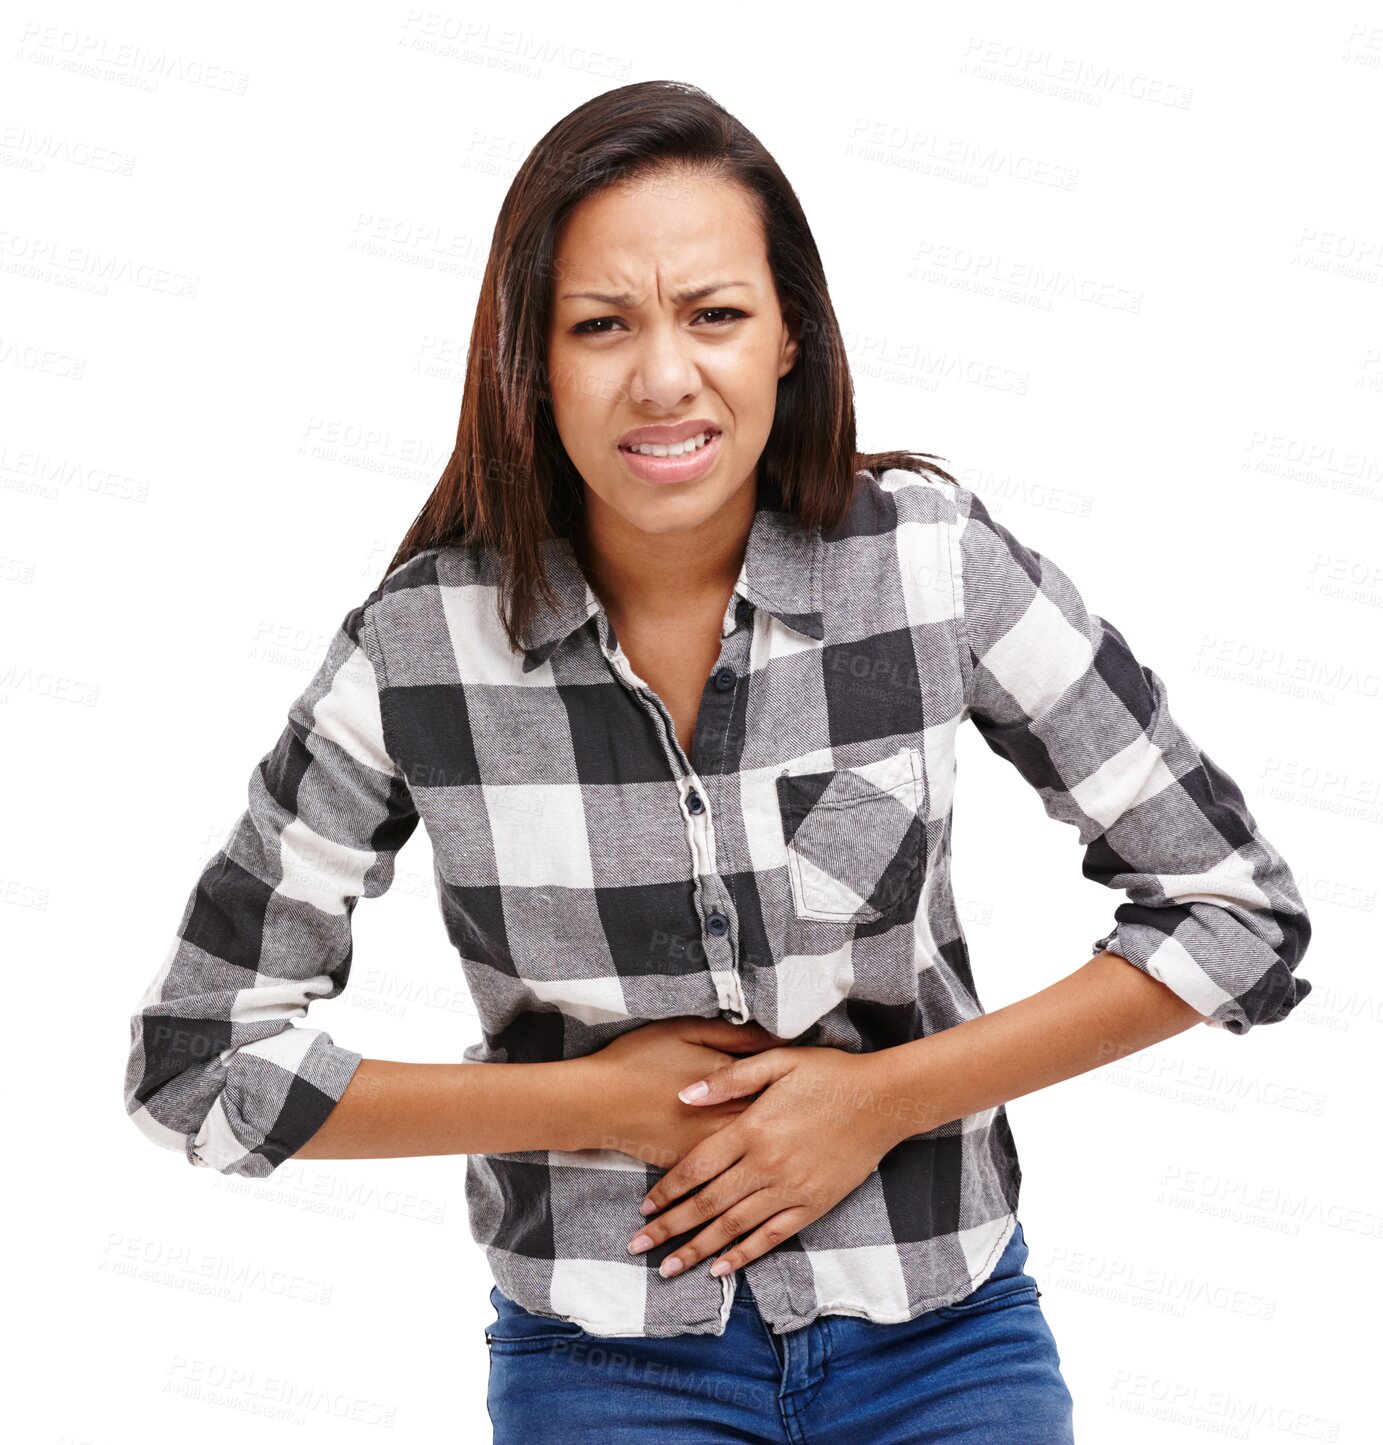 Buy stock photo Woman, portrait and stomach ache, pain and gut health with period cramps or endometriosis on png transparent background. Medical emergency, gastro or intestinal crisis, with constipation or menstrual